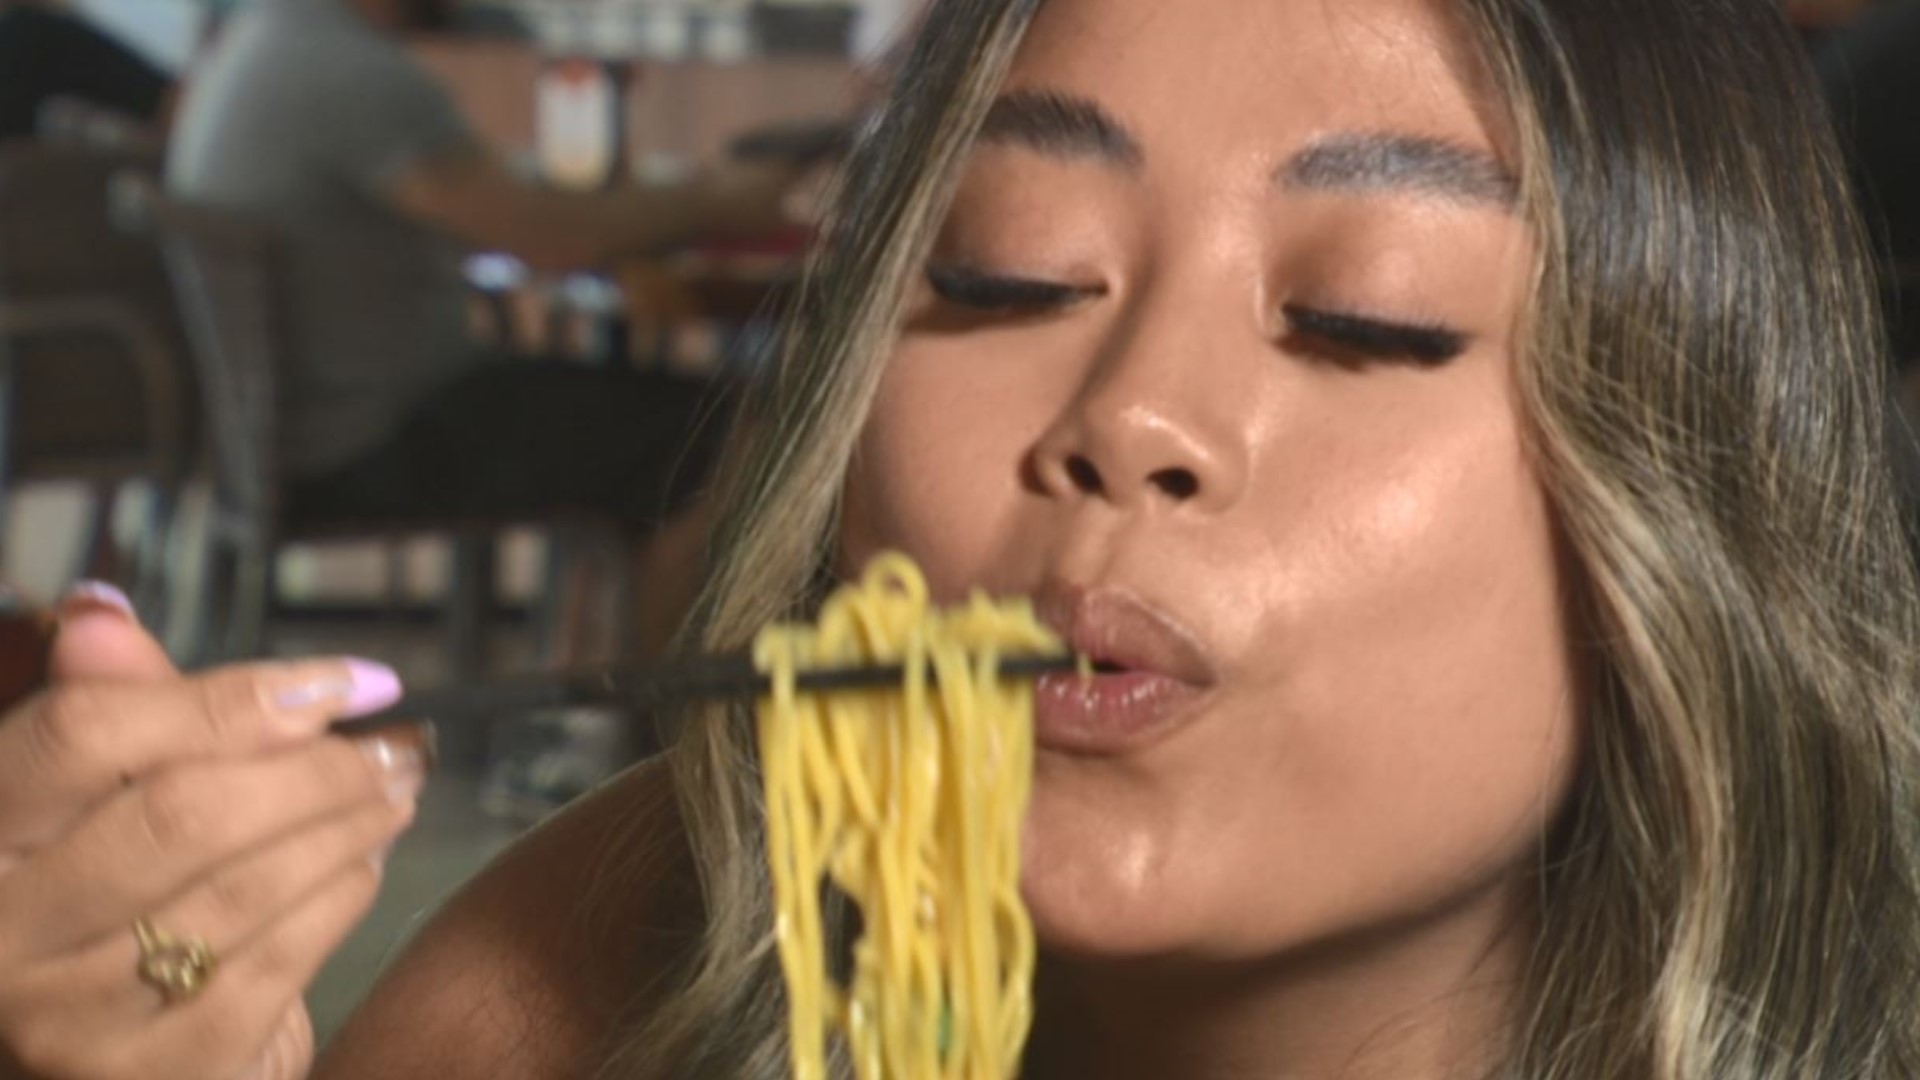 Tacoma born Teena Thach says celebrating food has helped her heal. #k5evening